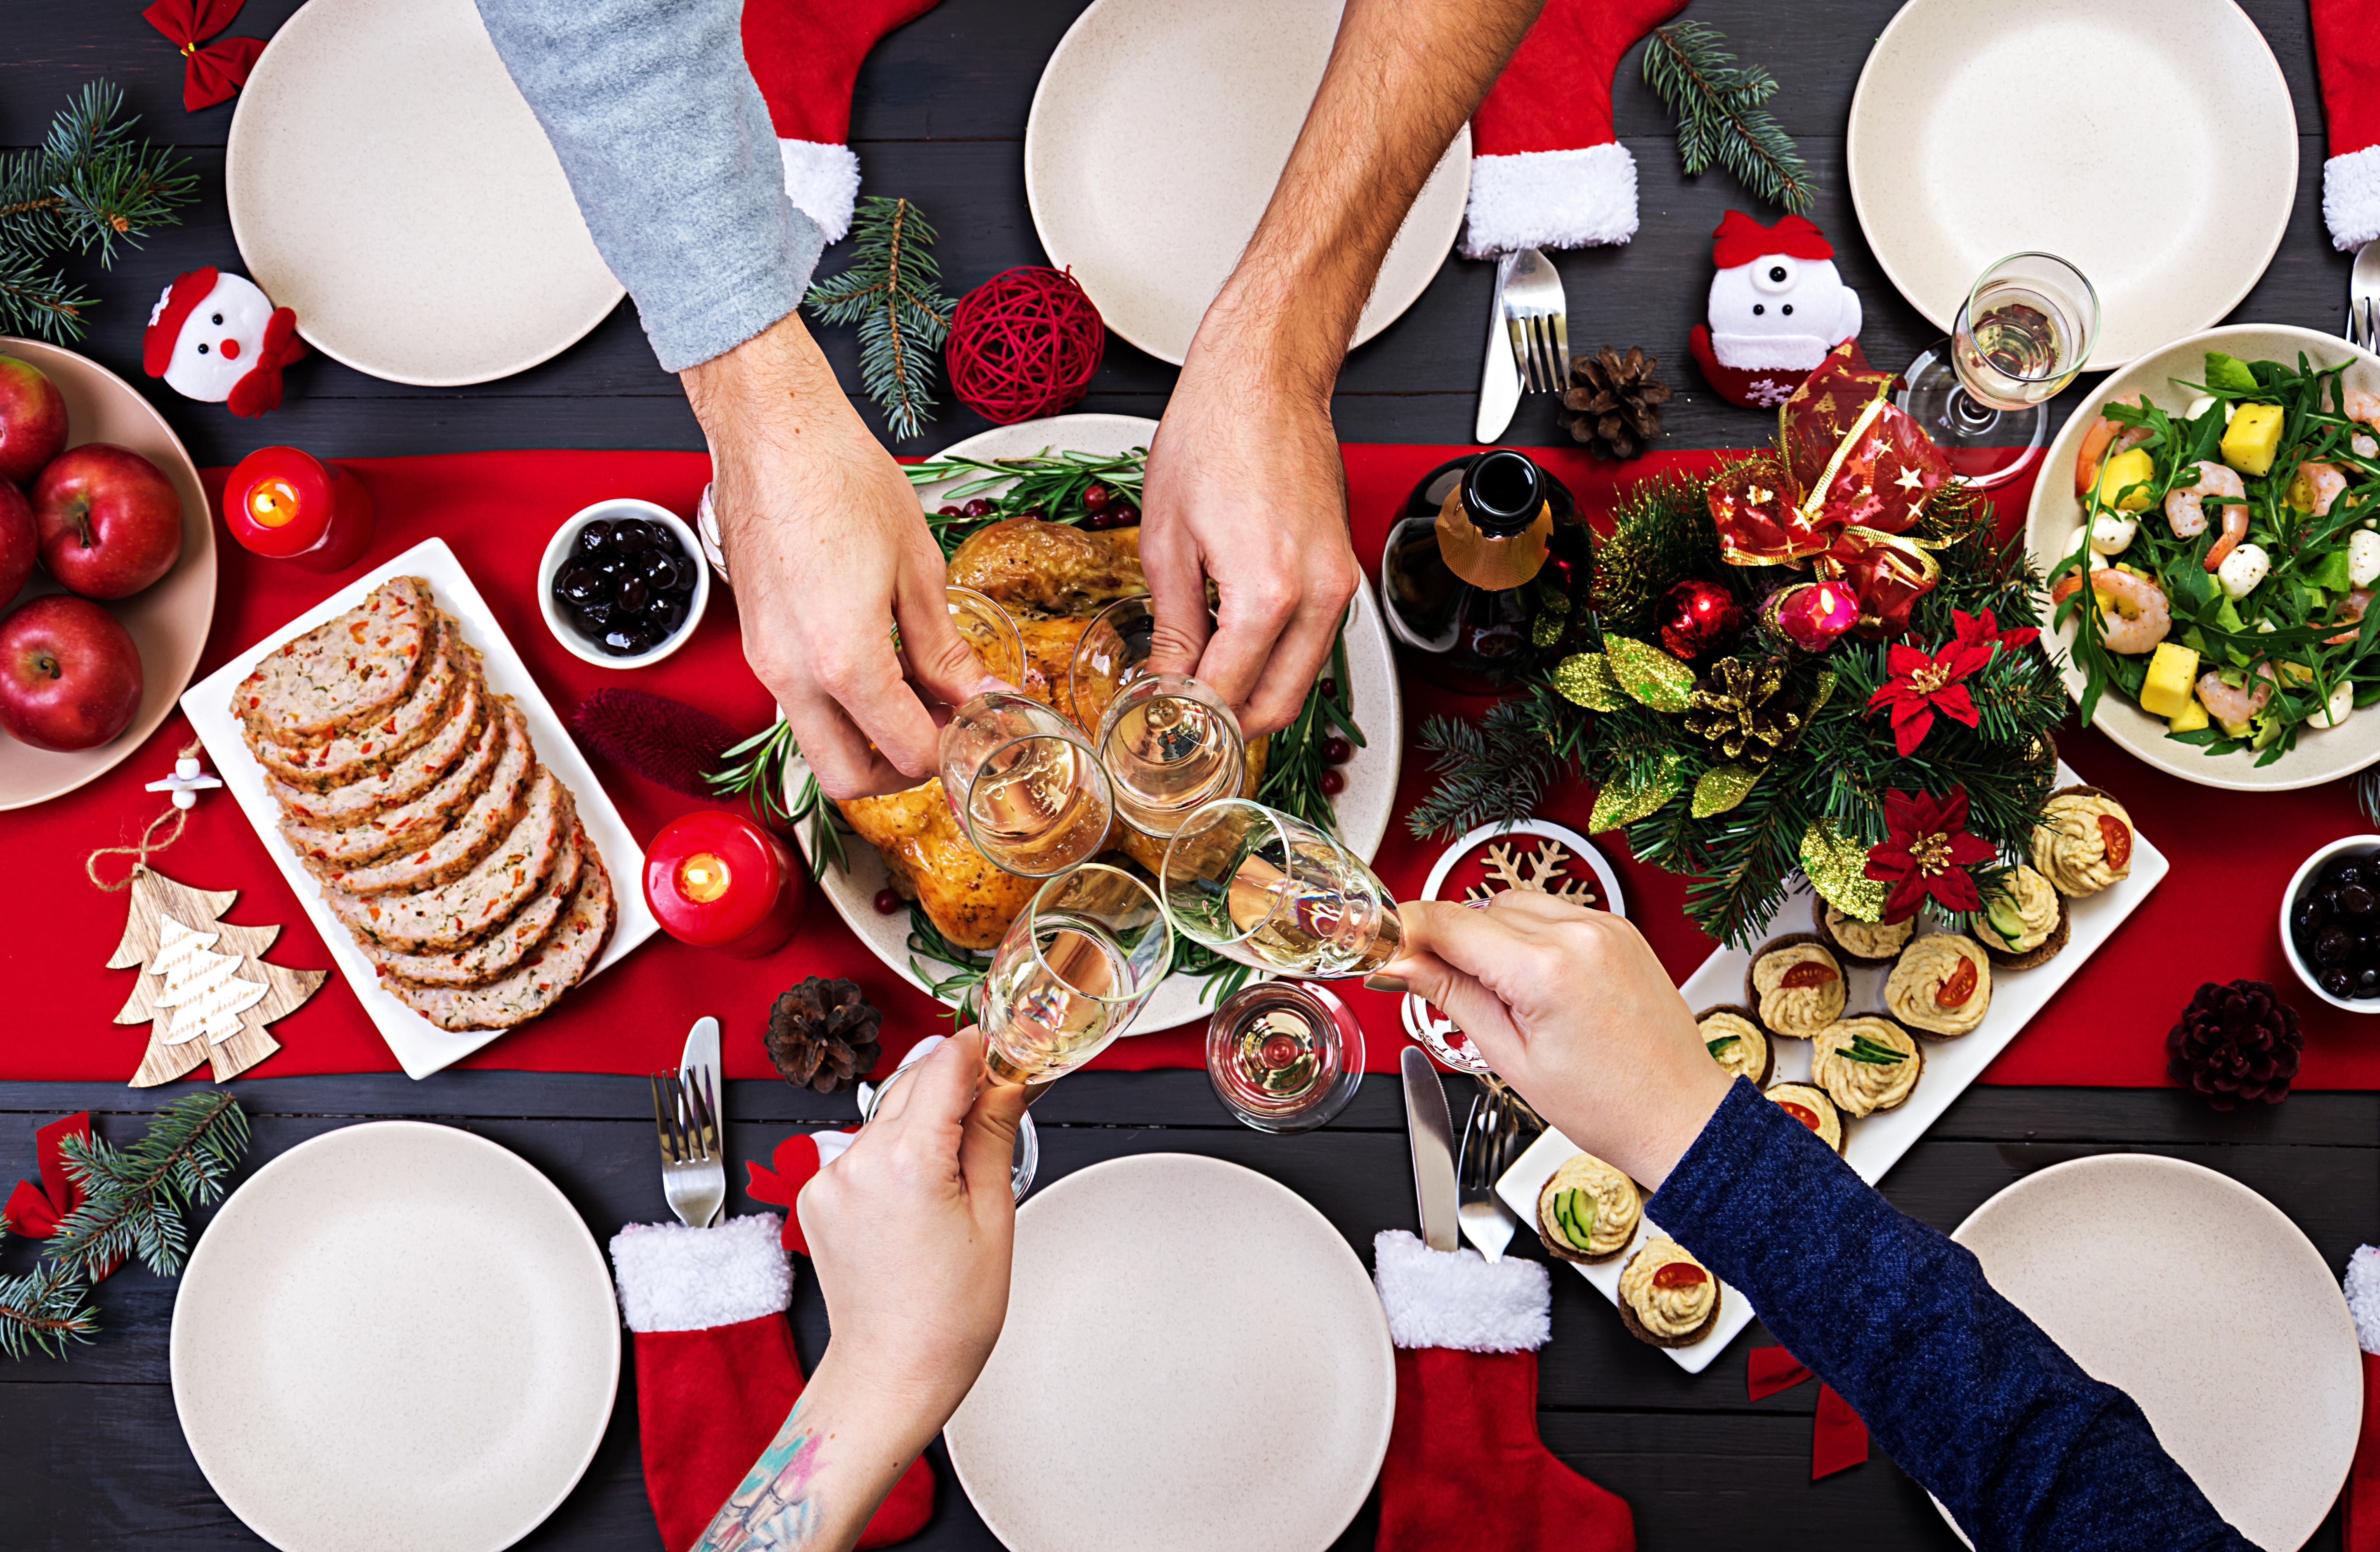 A full Christmas dinner with all the trimmings may be hard to ignore, but don’t feel obligated to have to eat everything that’s going. Photo: Alamy